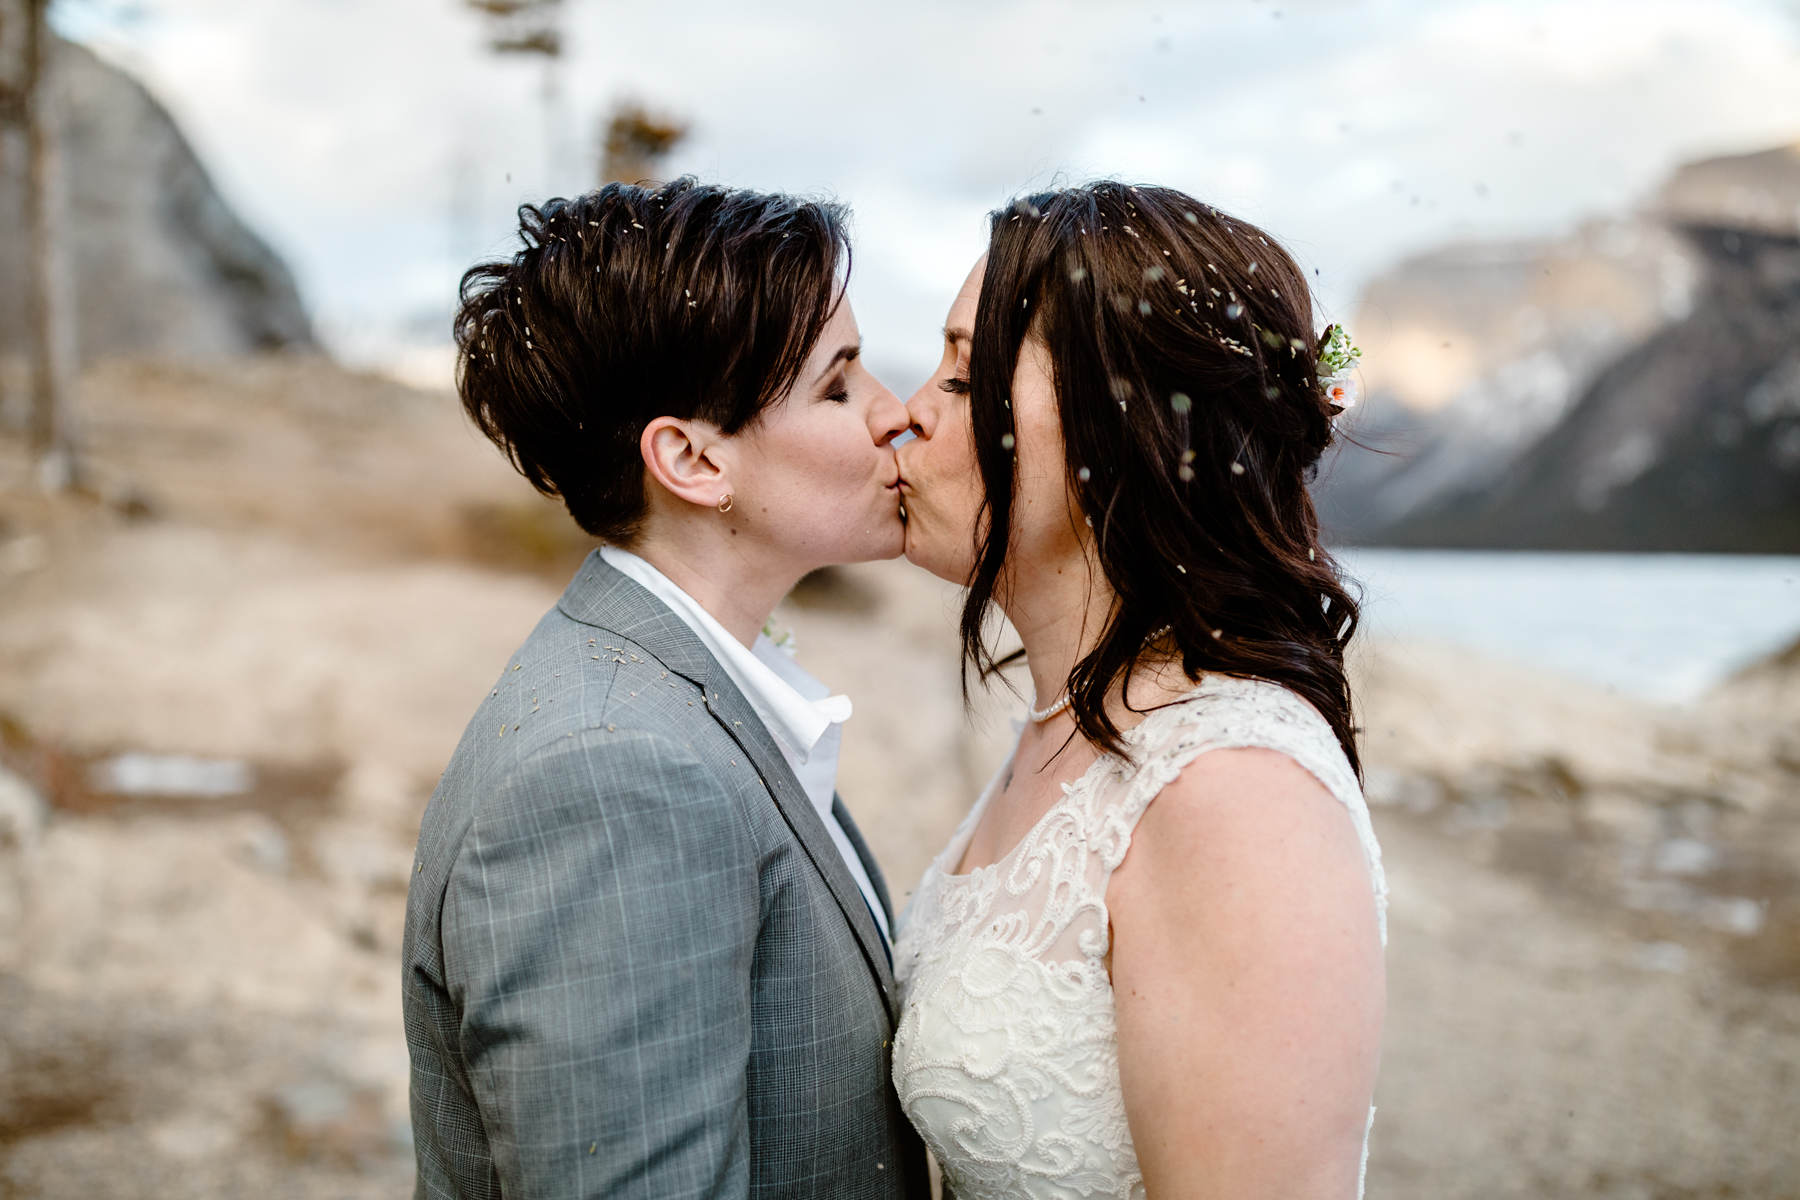 Banff National Park Elopement Photography with LGBTQ-friendly photographers - Image 28